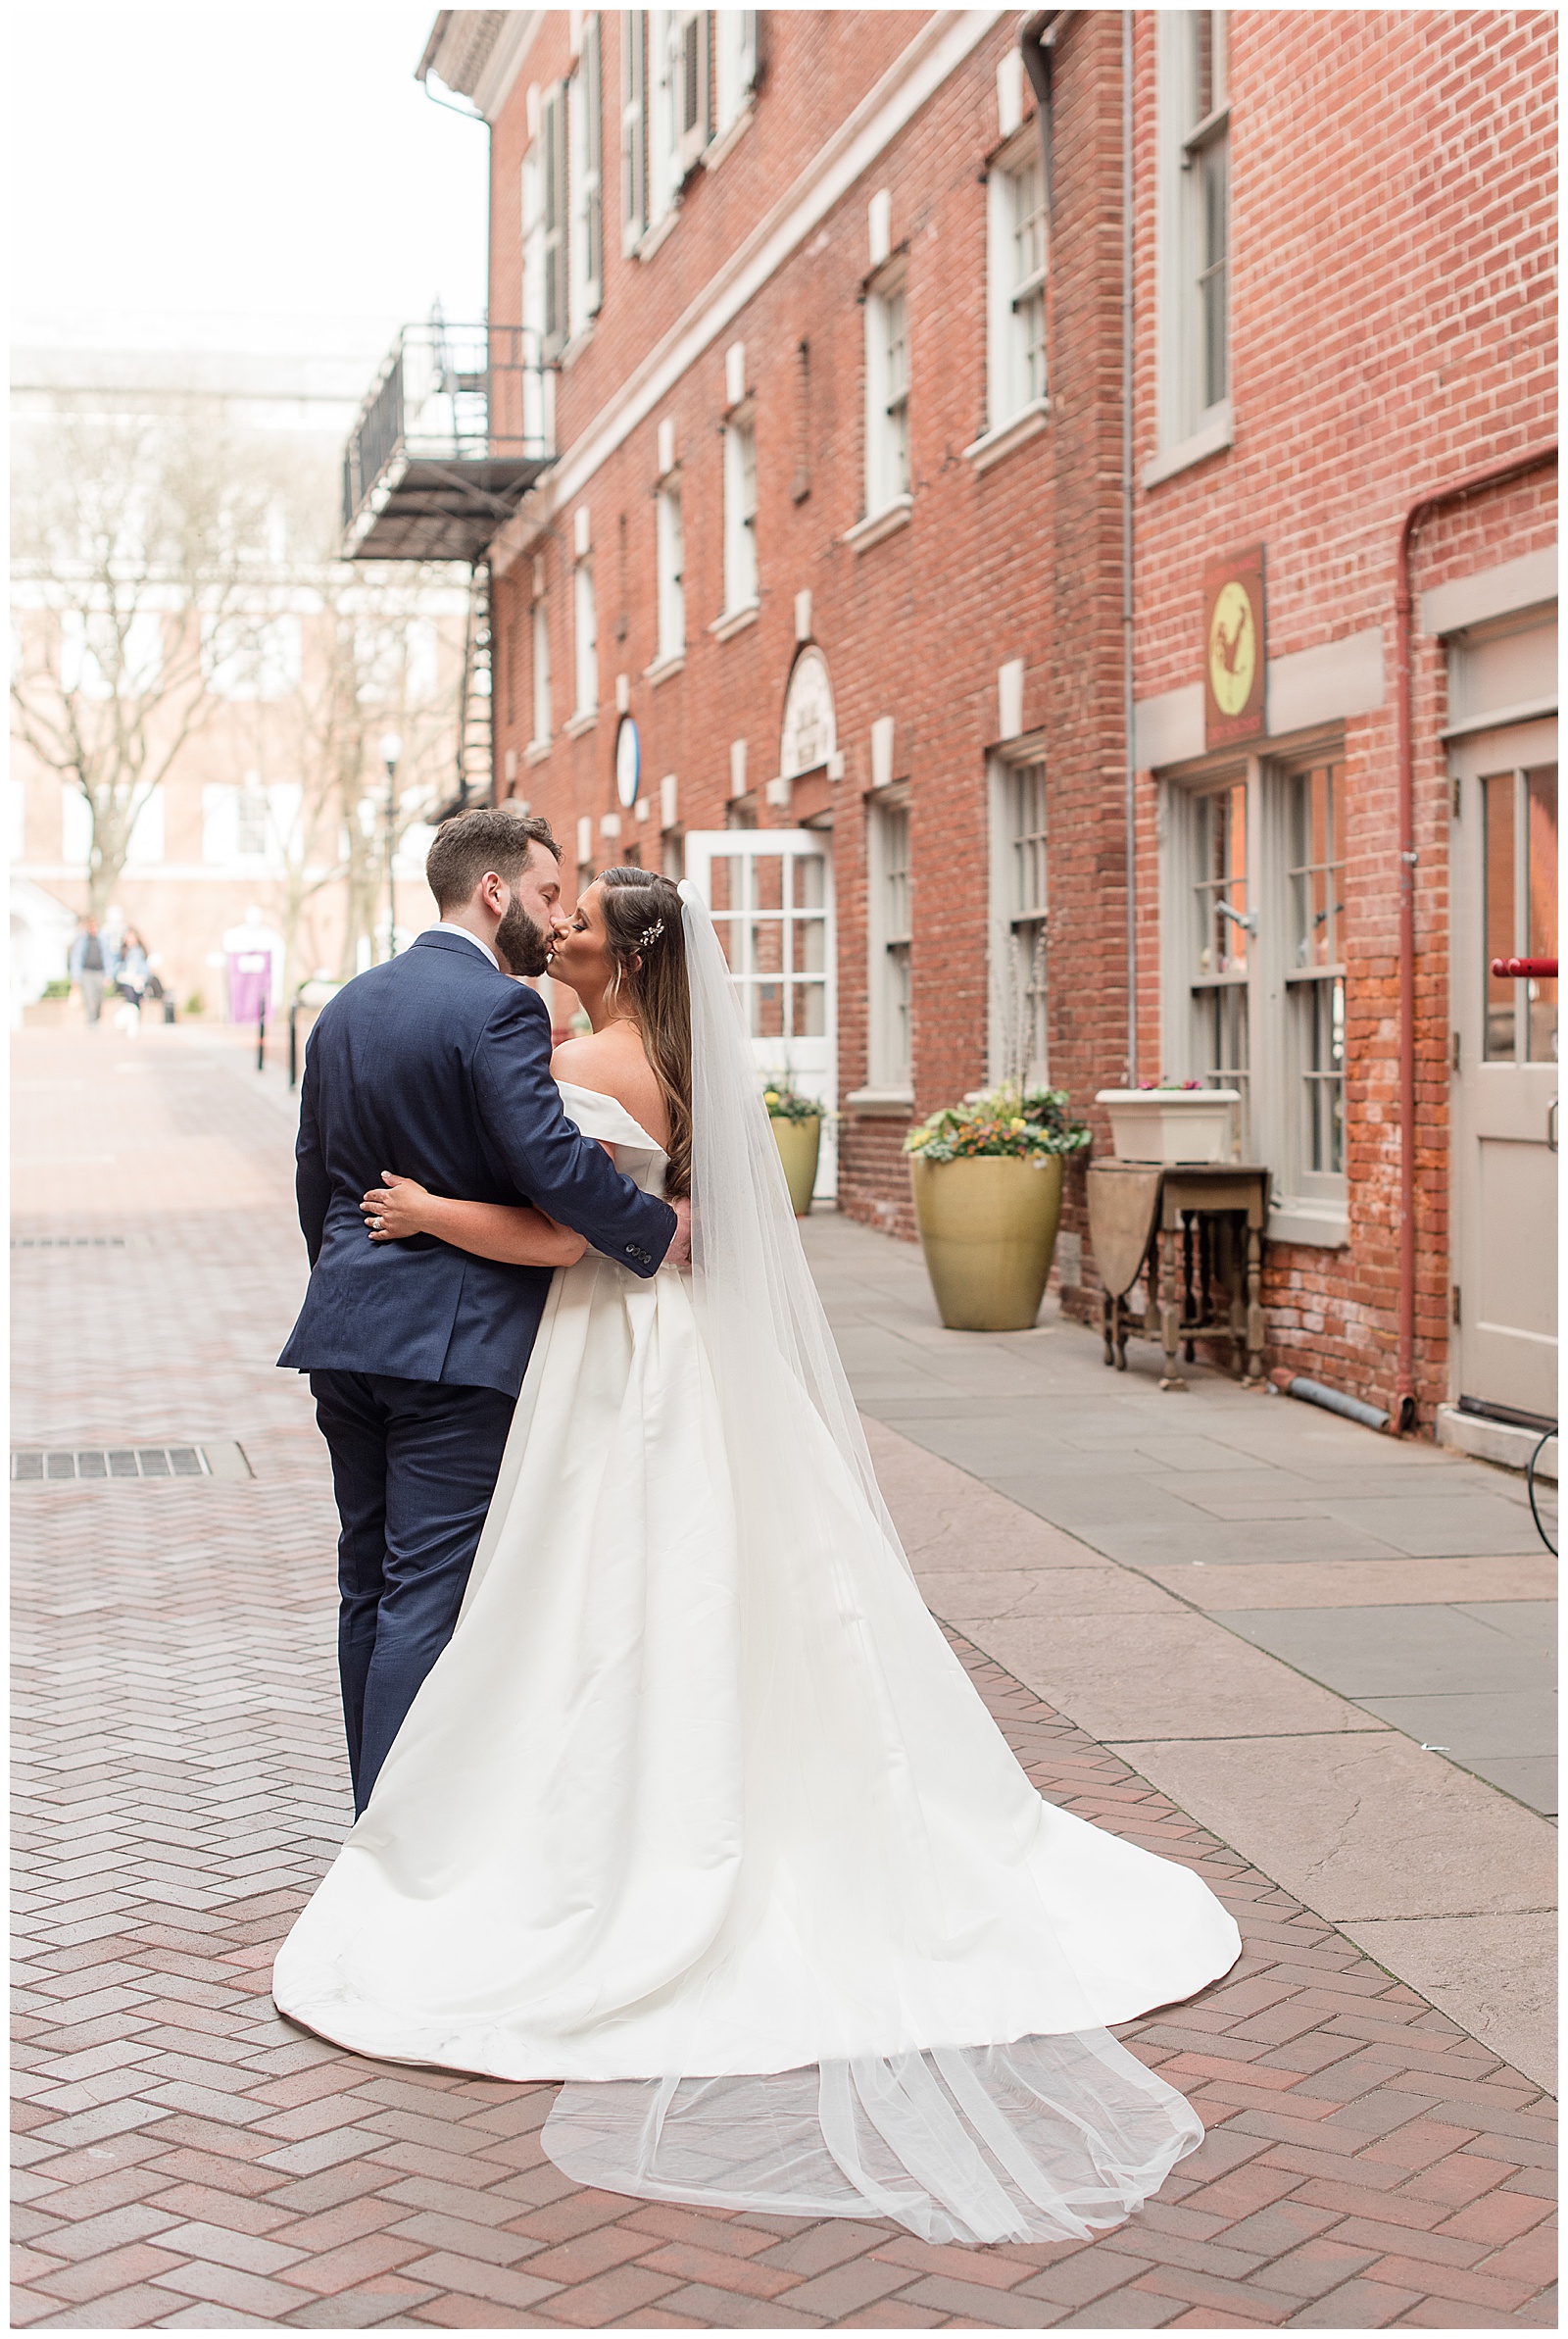 groom and bride standing close kissing with their backs to camera on cobblestone street in downtown lancaster pennsylvania